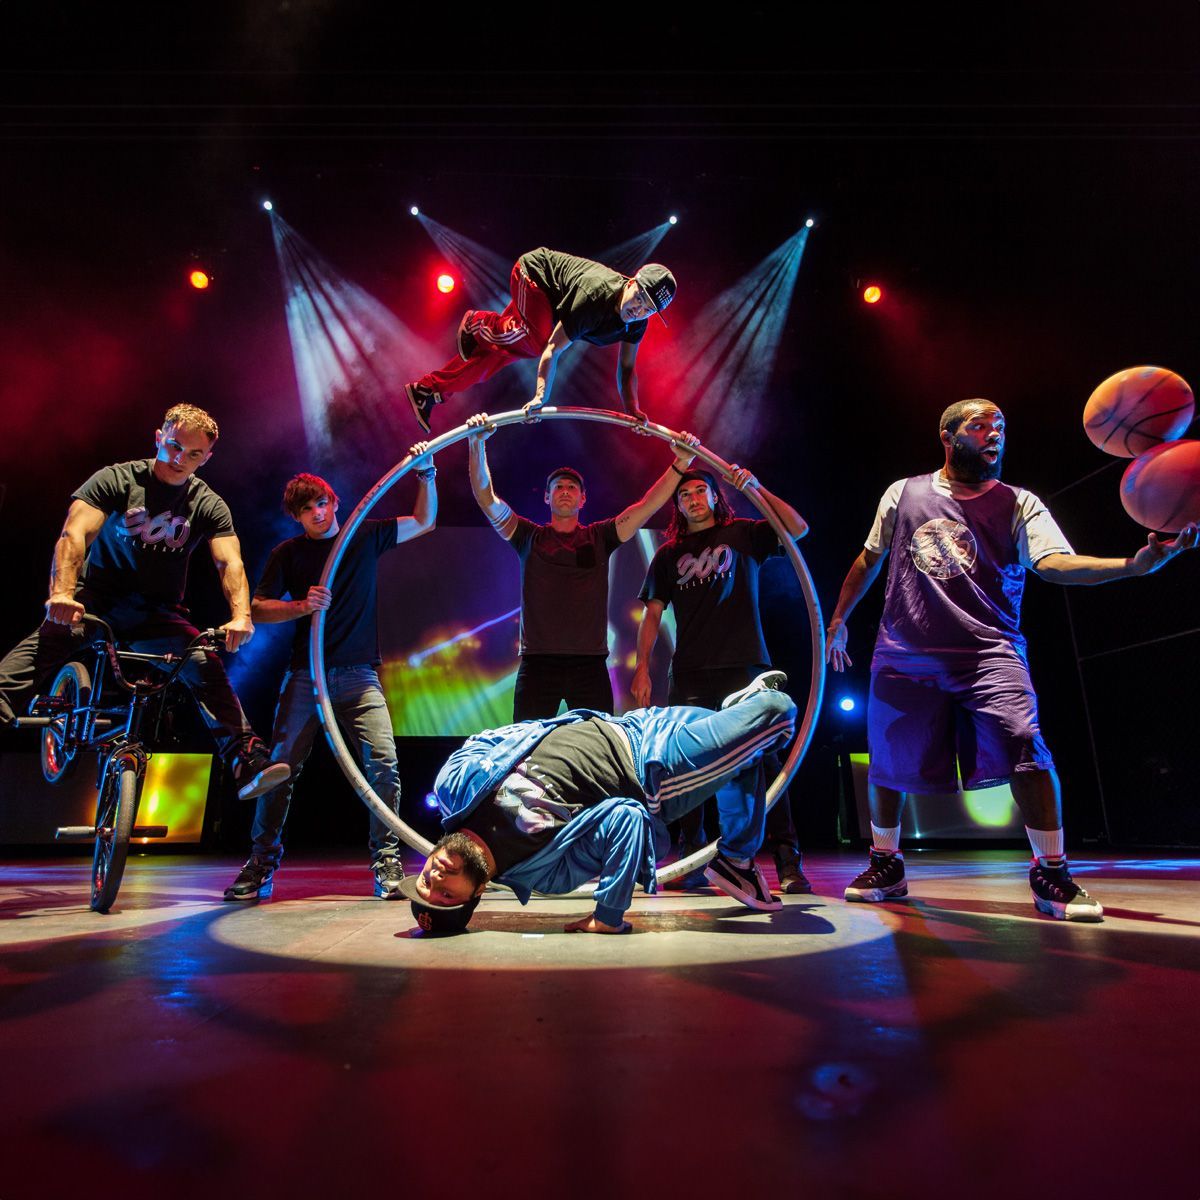 A group of people are performing on a stage and one of them is holding a basketball